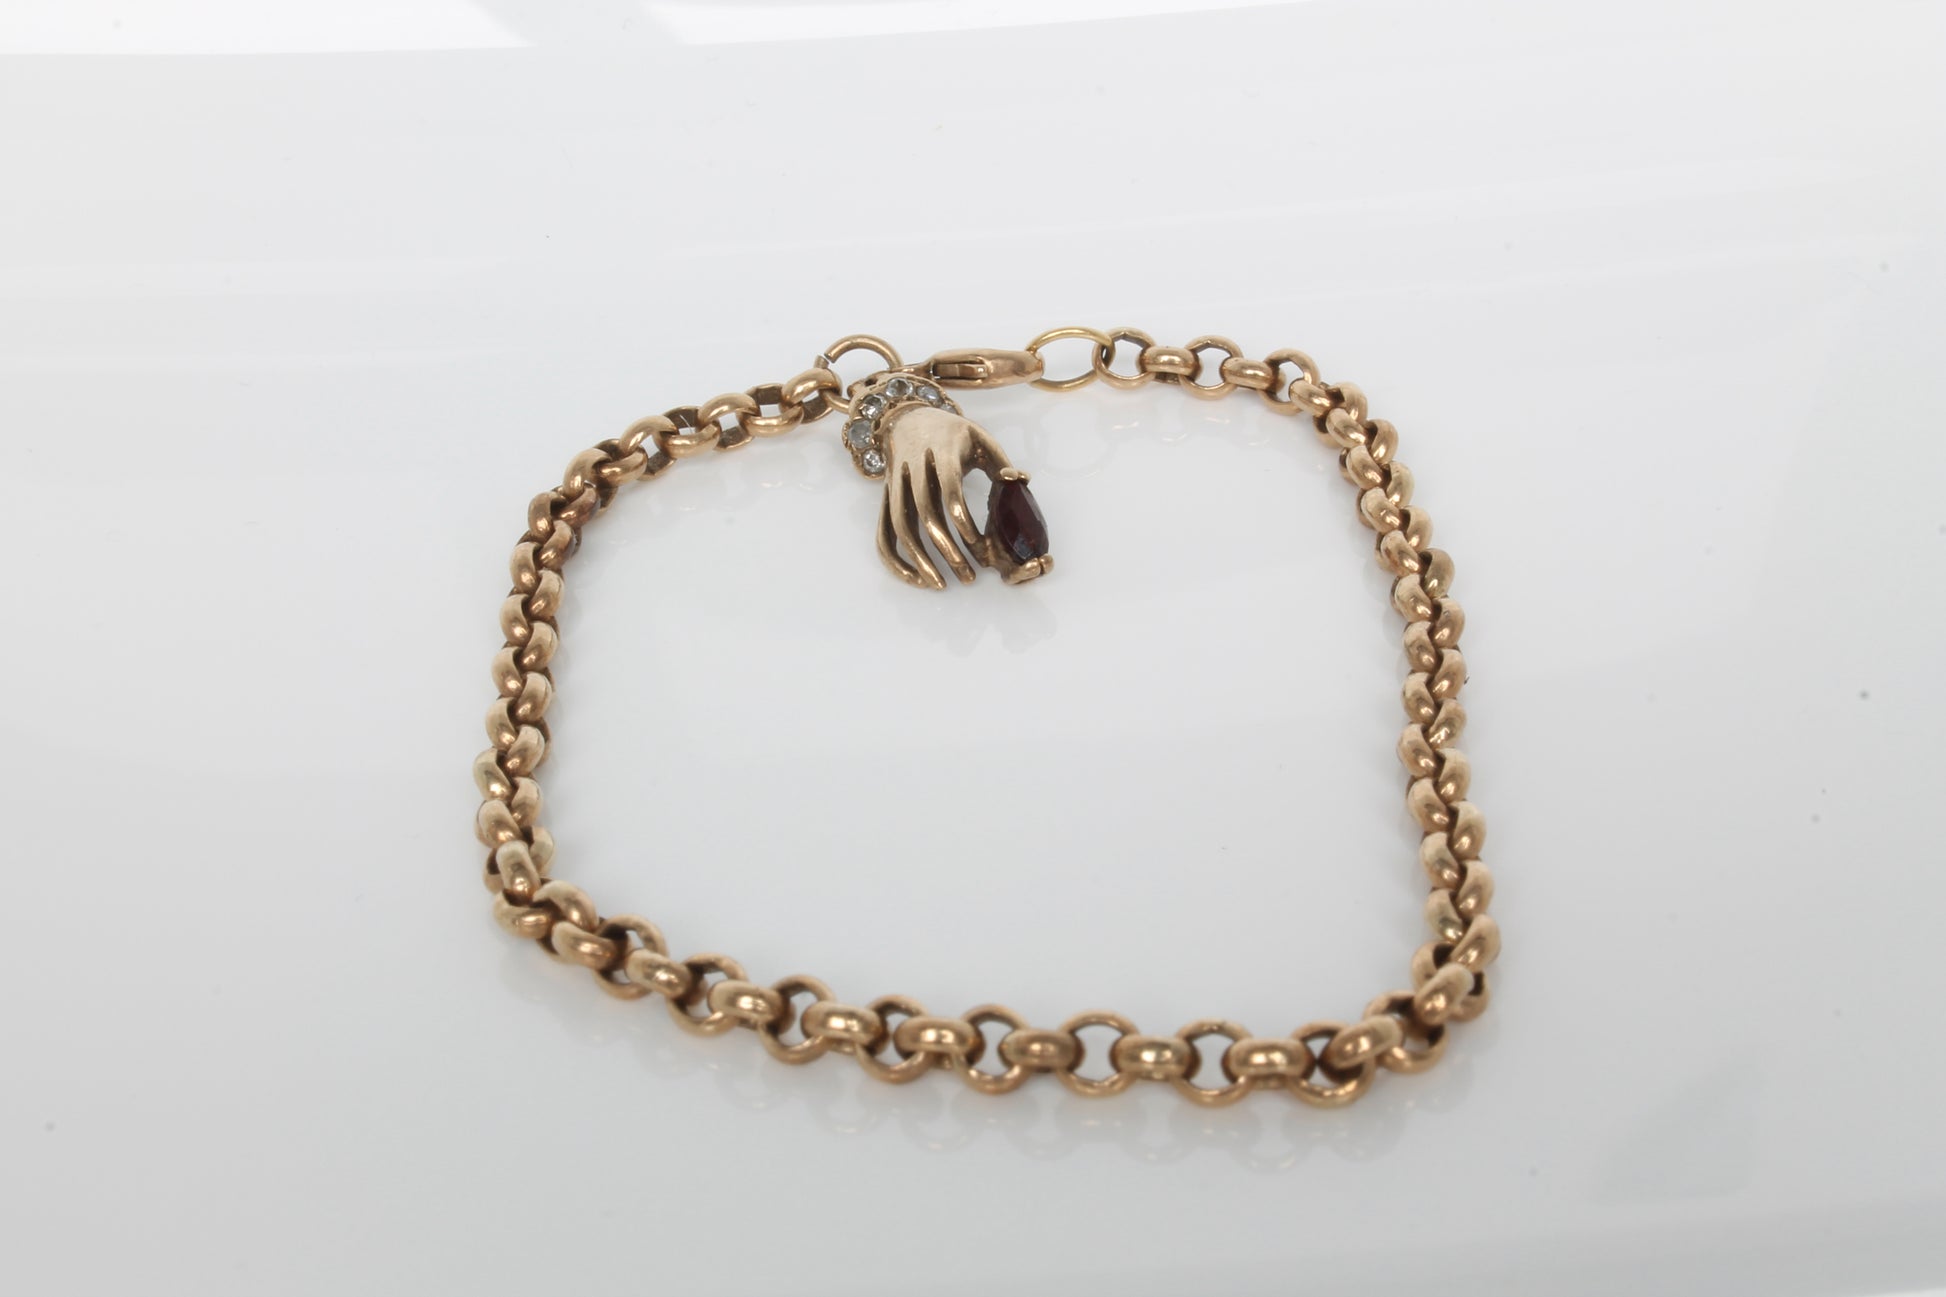 vintage-9ct-gold-bracelet-with-georgian-style-hand